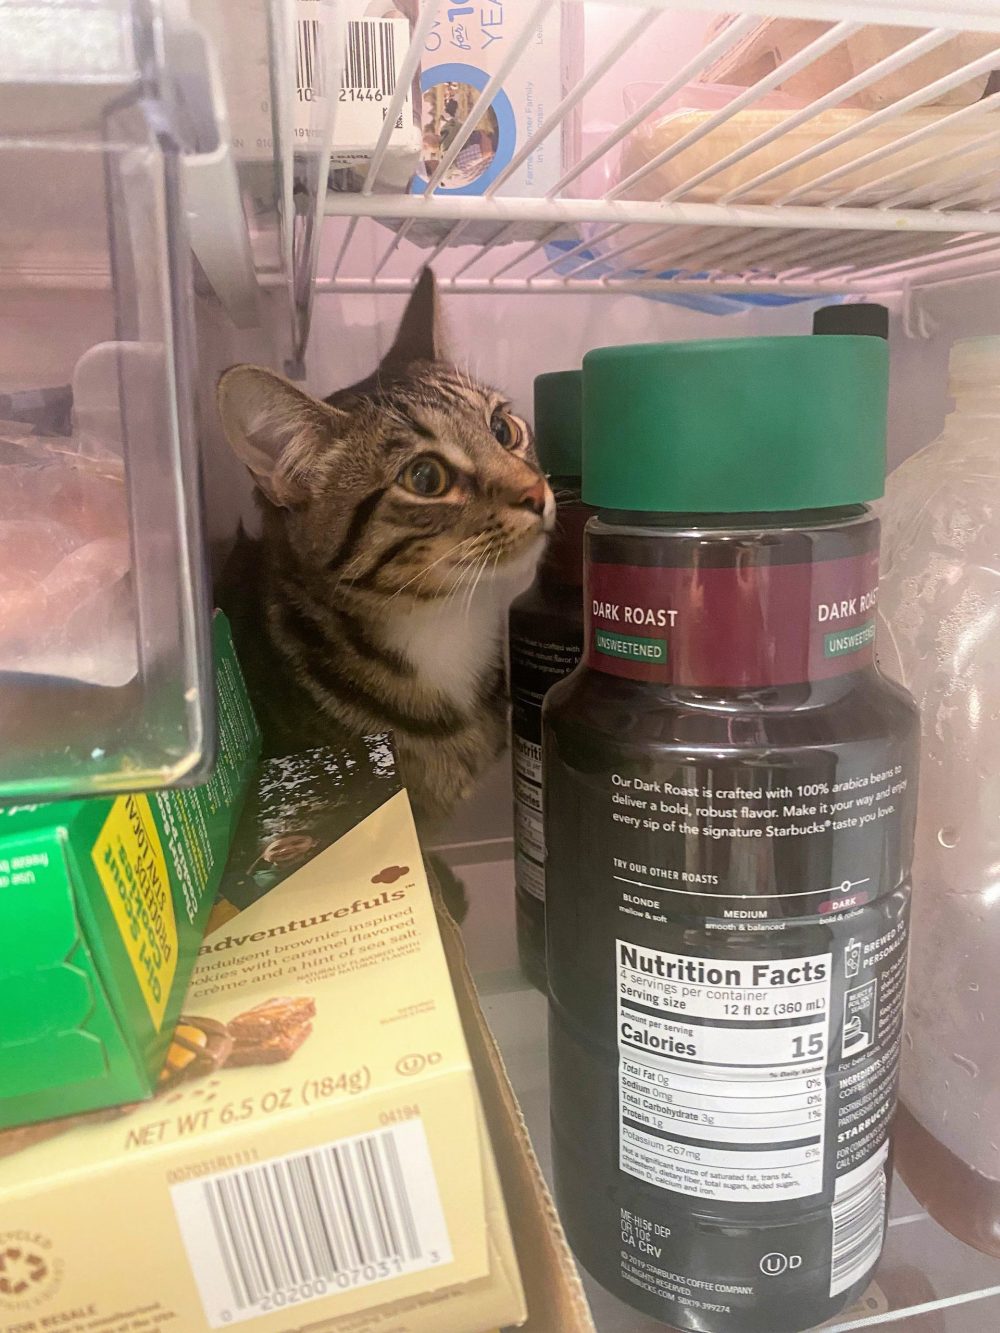 This tabby cat always jumps into fridge when it is opened